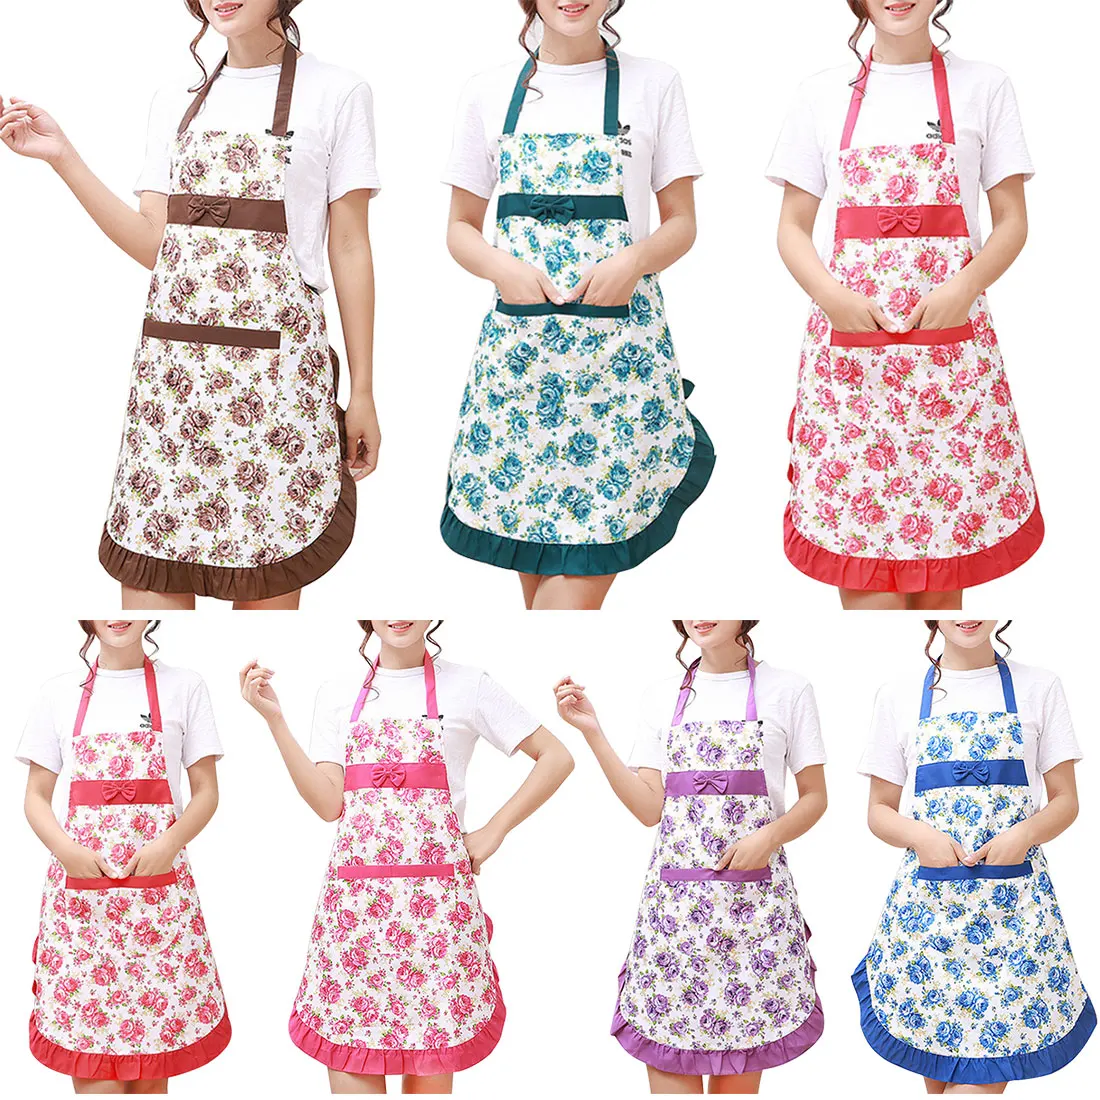 New Kitchen Pinafore Floral Cotton Linen Apron Woman Bibs For Home Cooking Baking Coffee Shop 